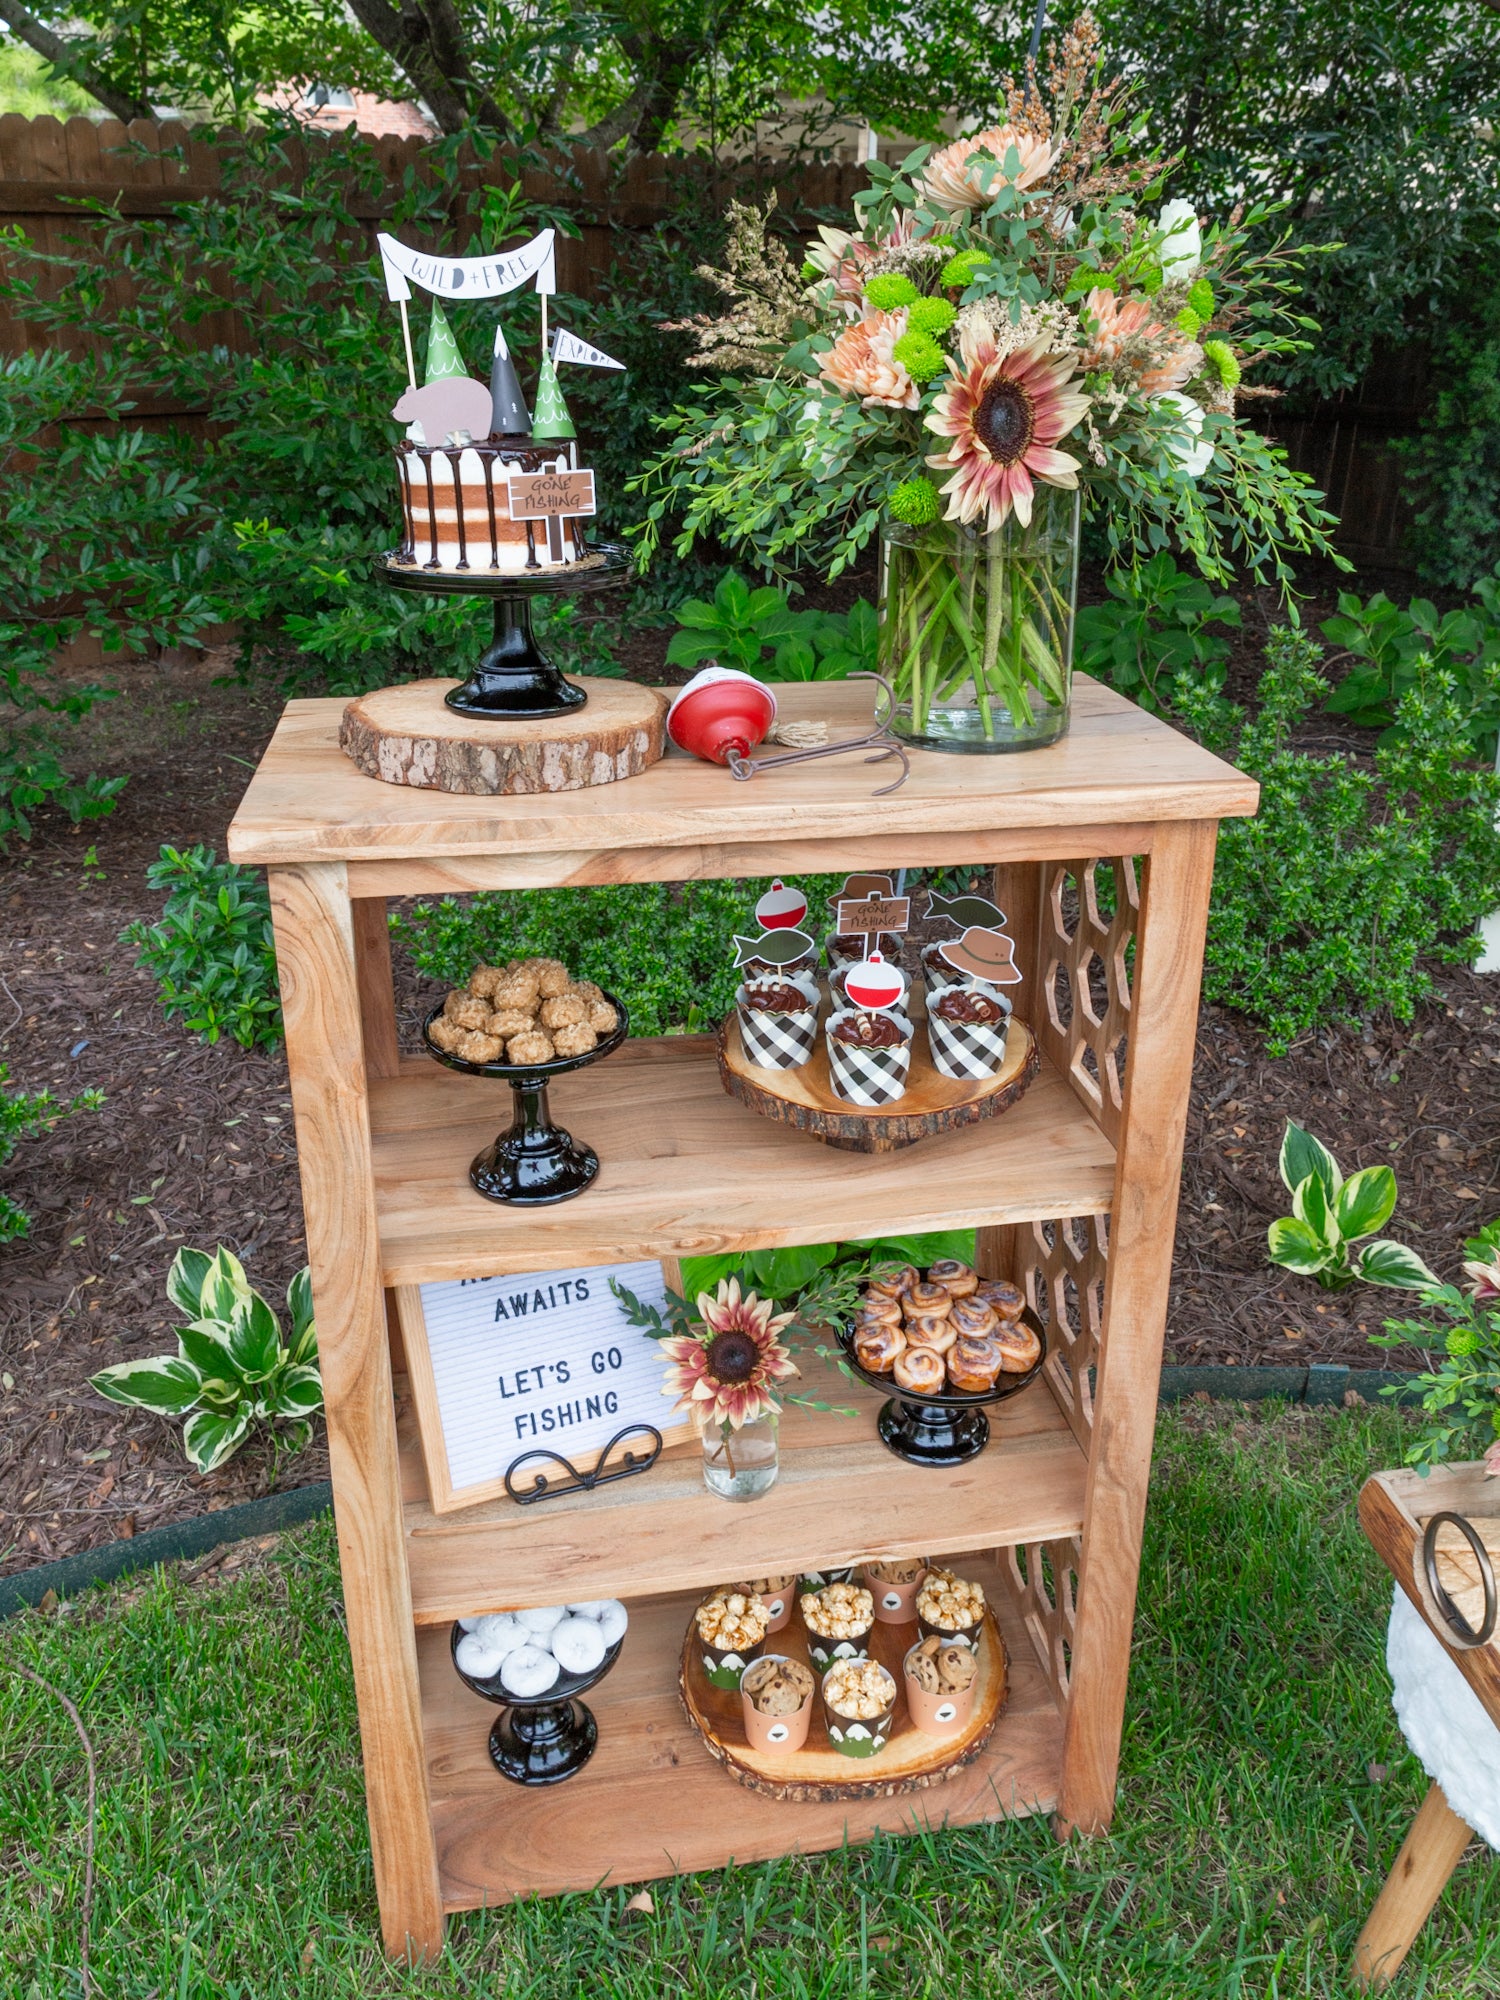 Snack Shelves at Camping Party | The Party Darling